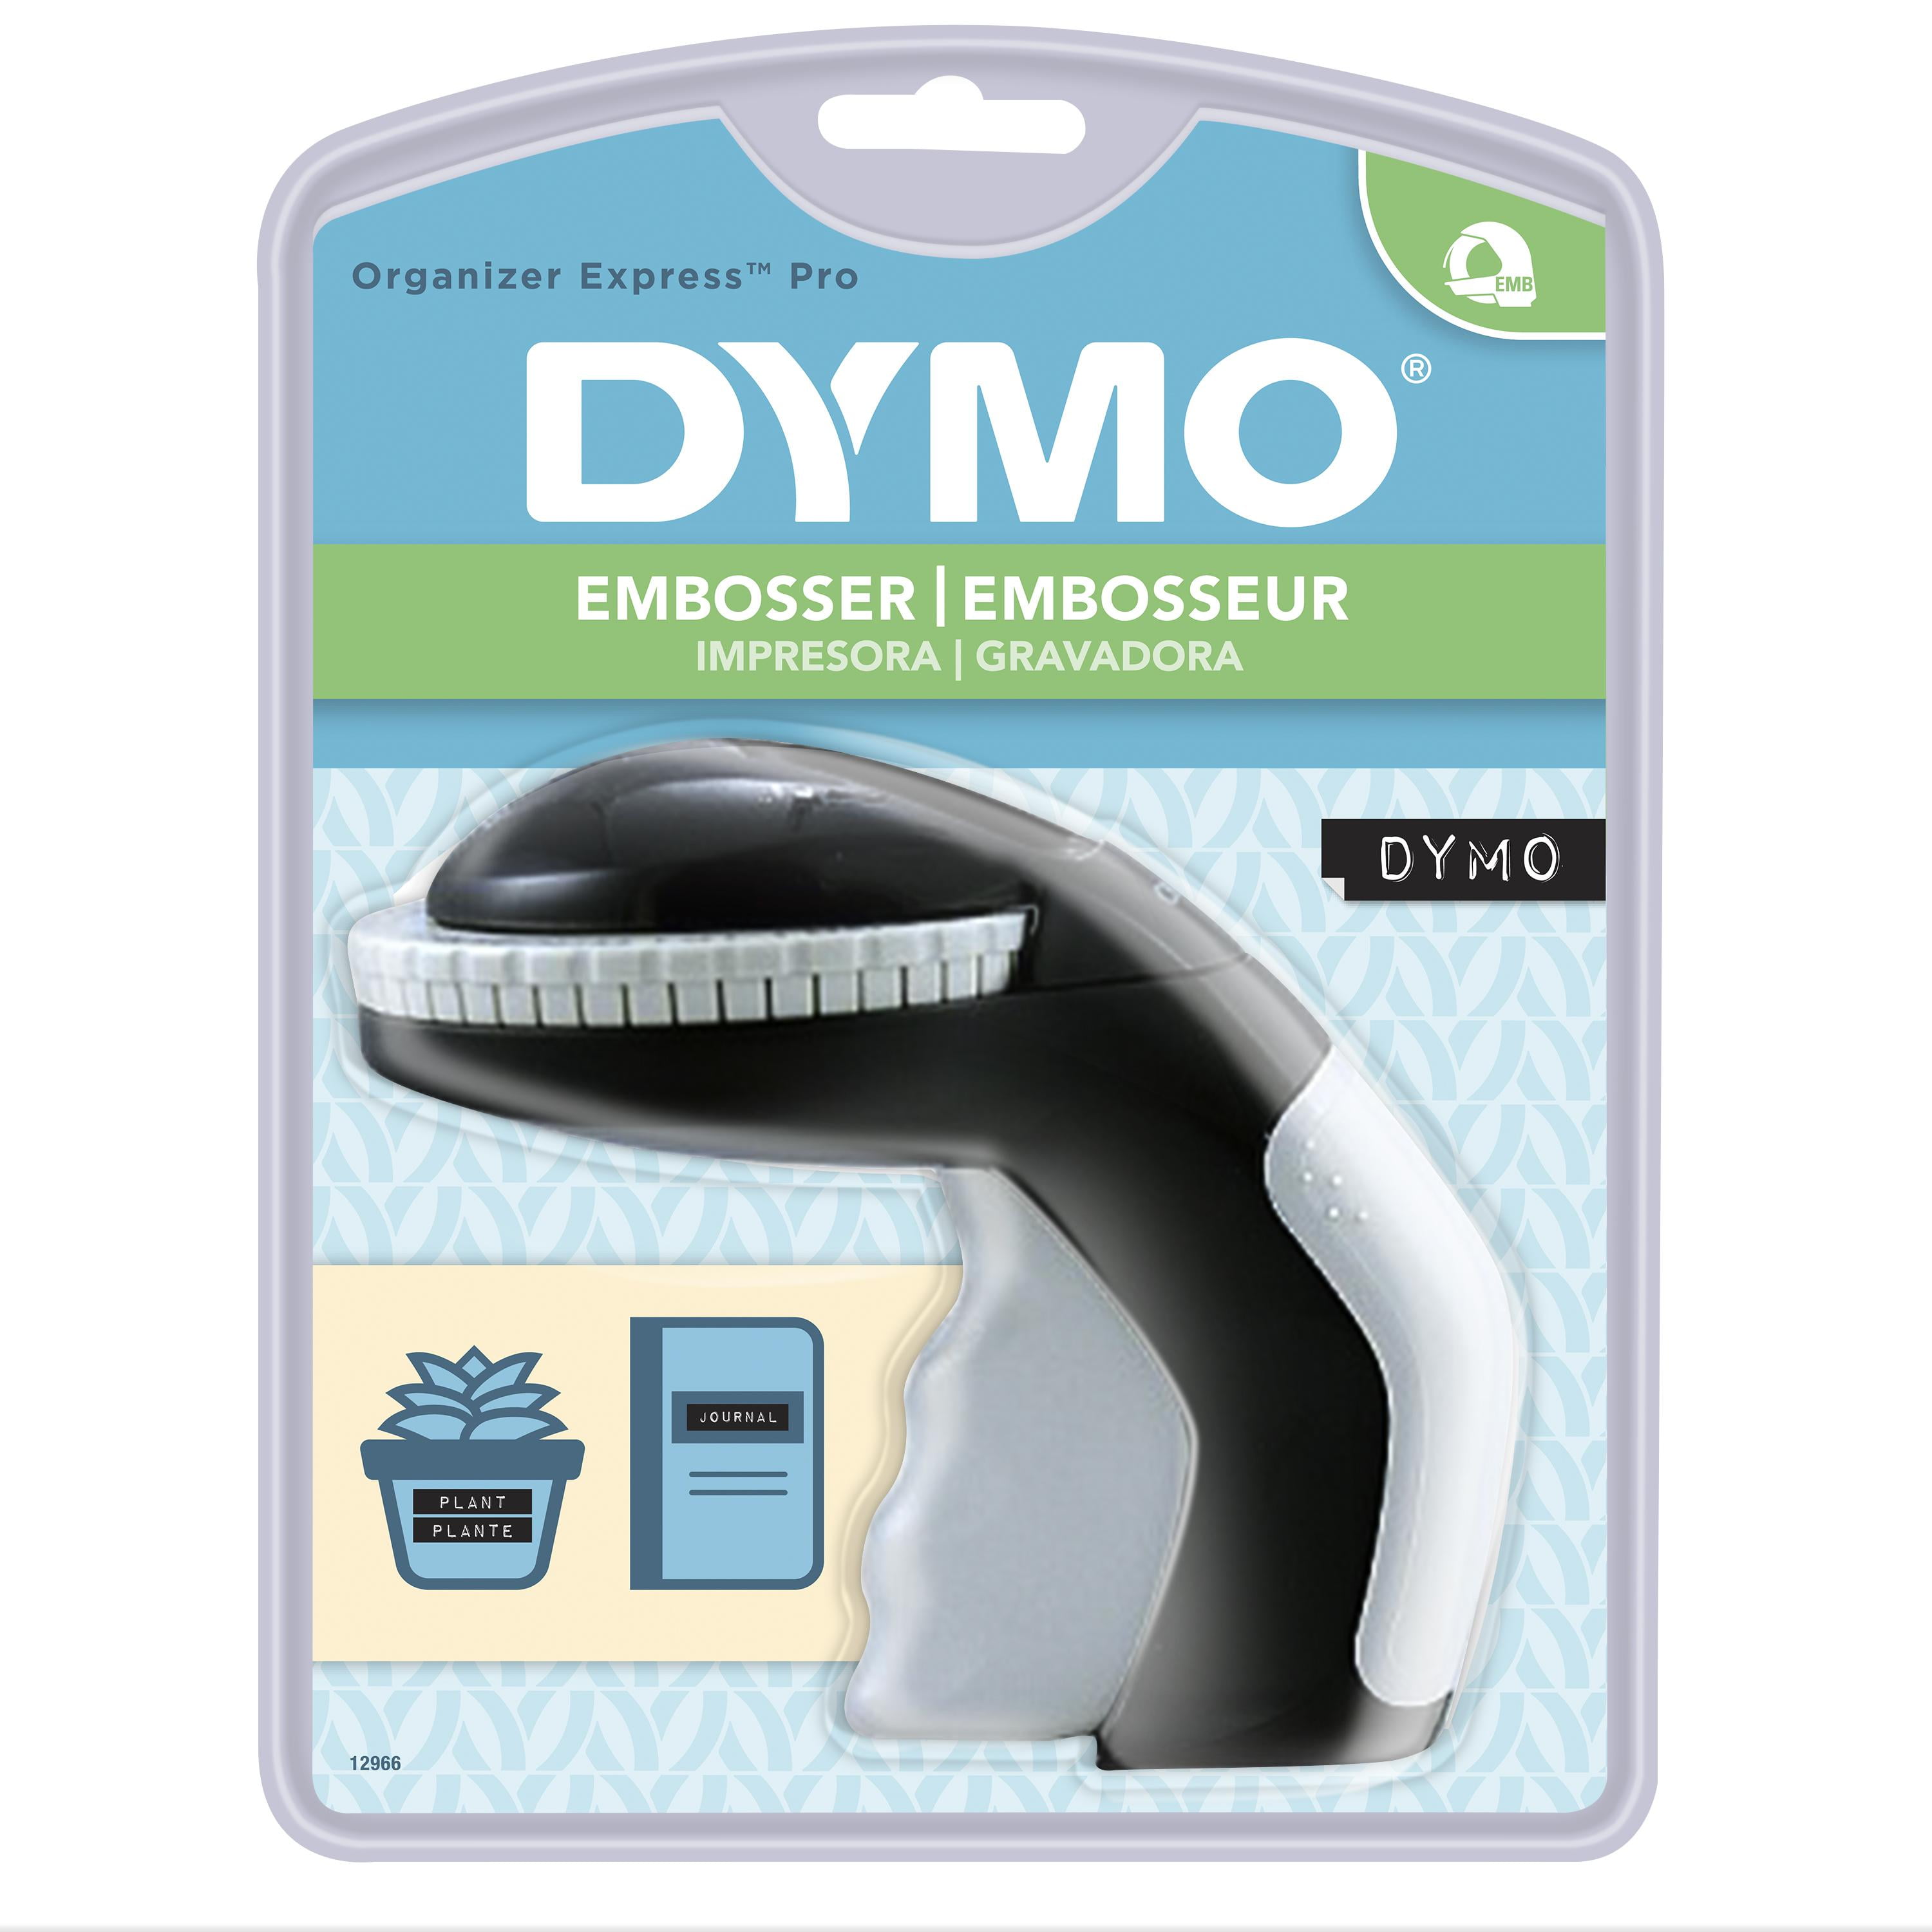 Embossing Label Maker with 3 DYMO Label Tapes New 